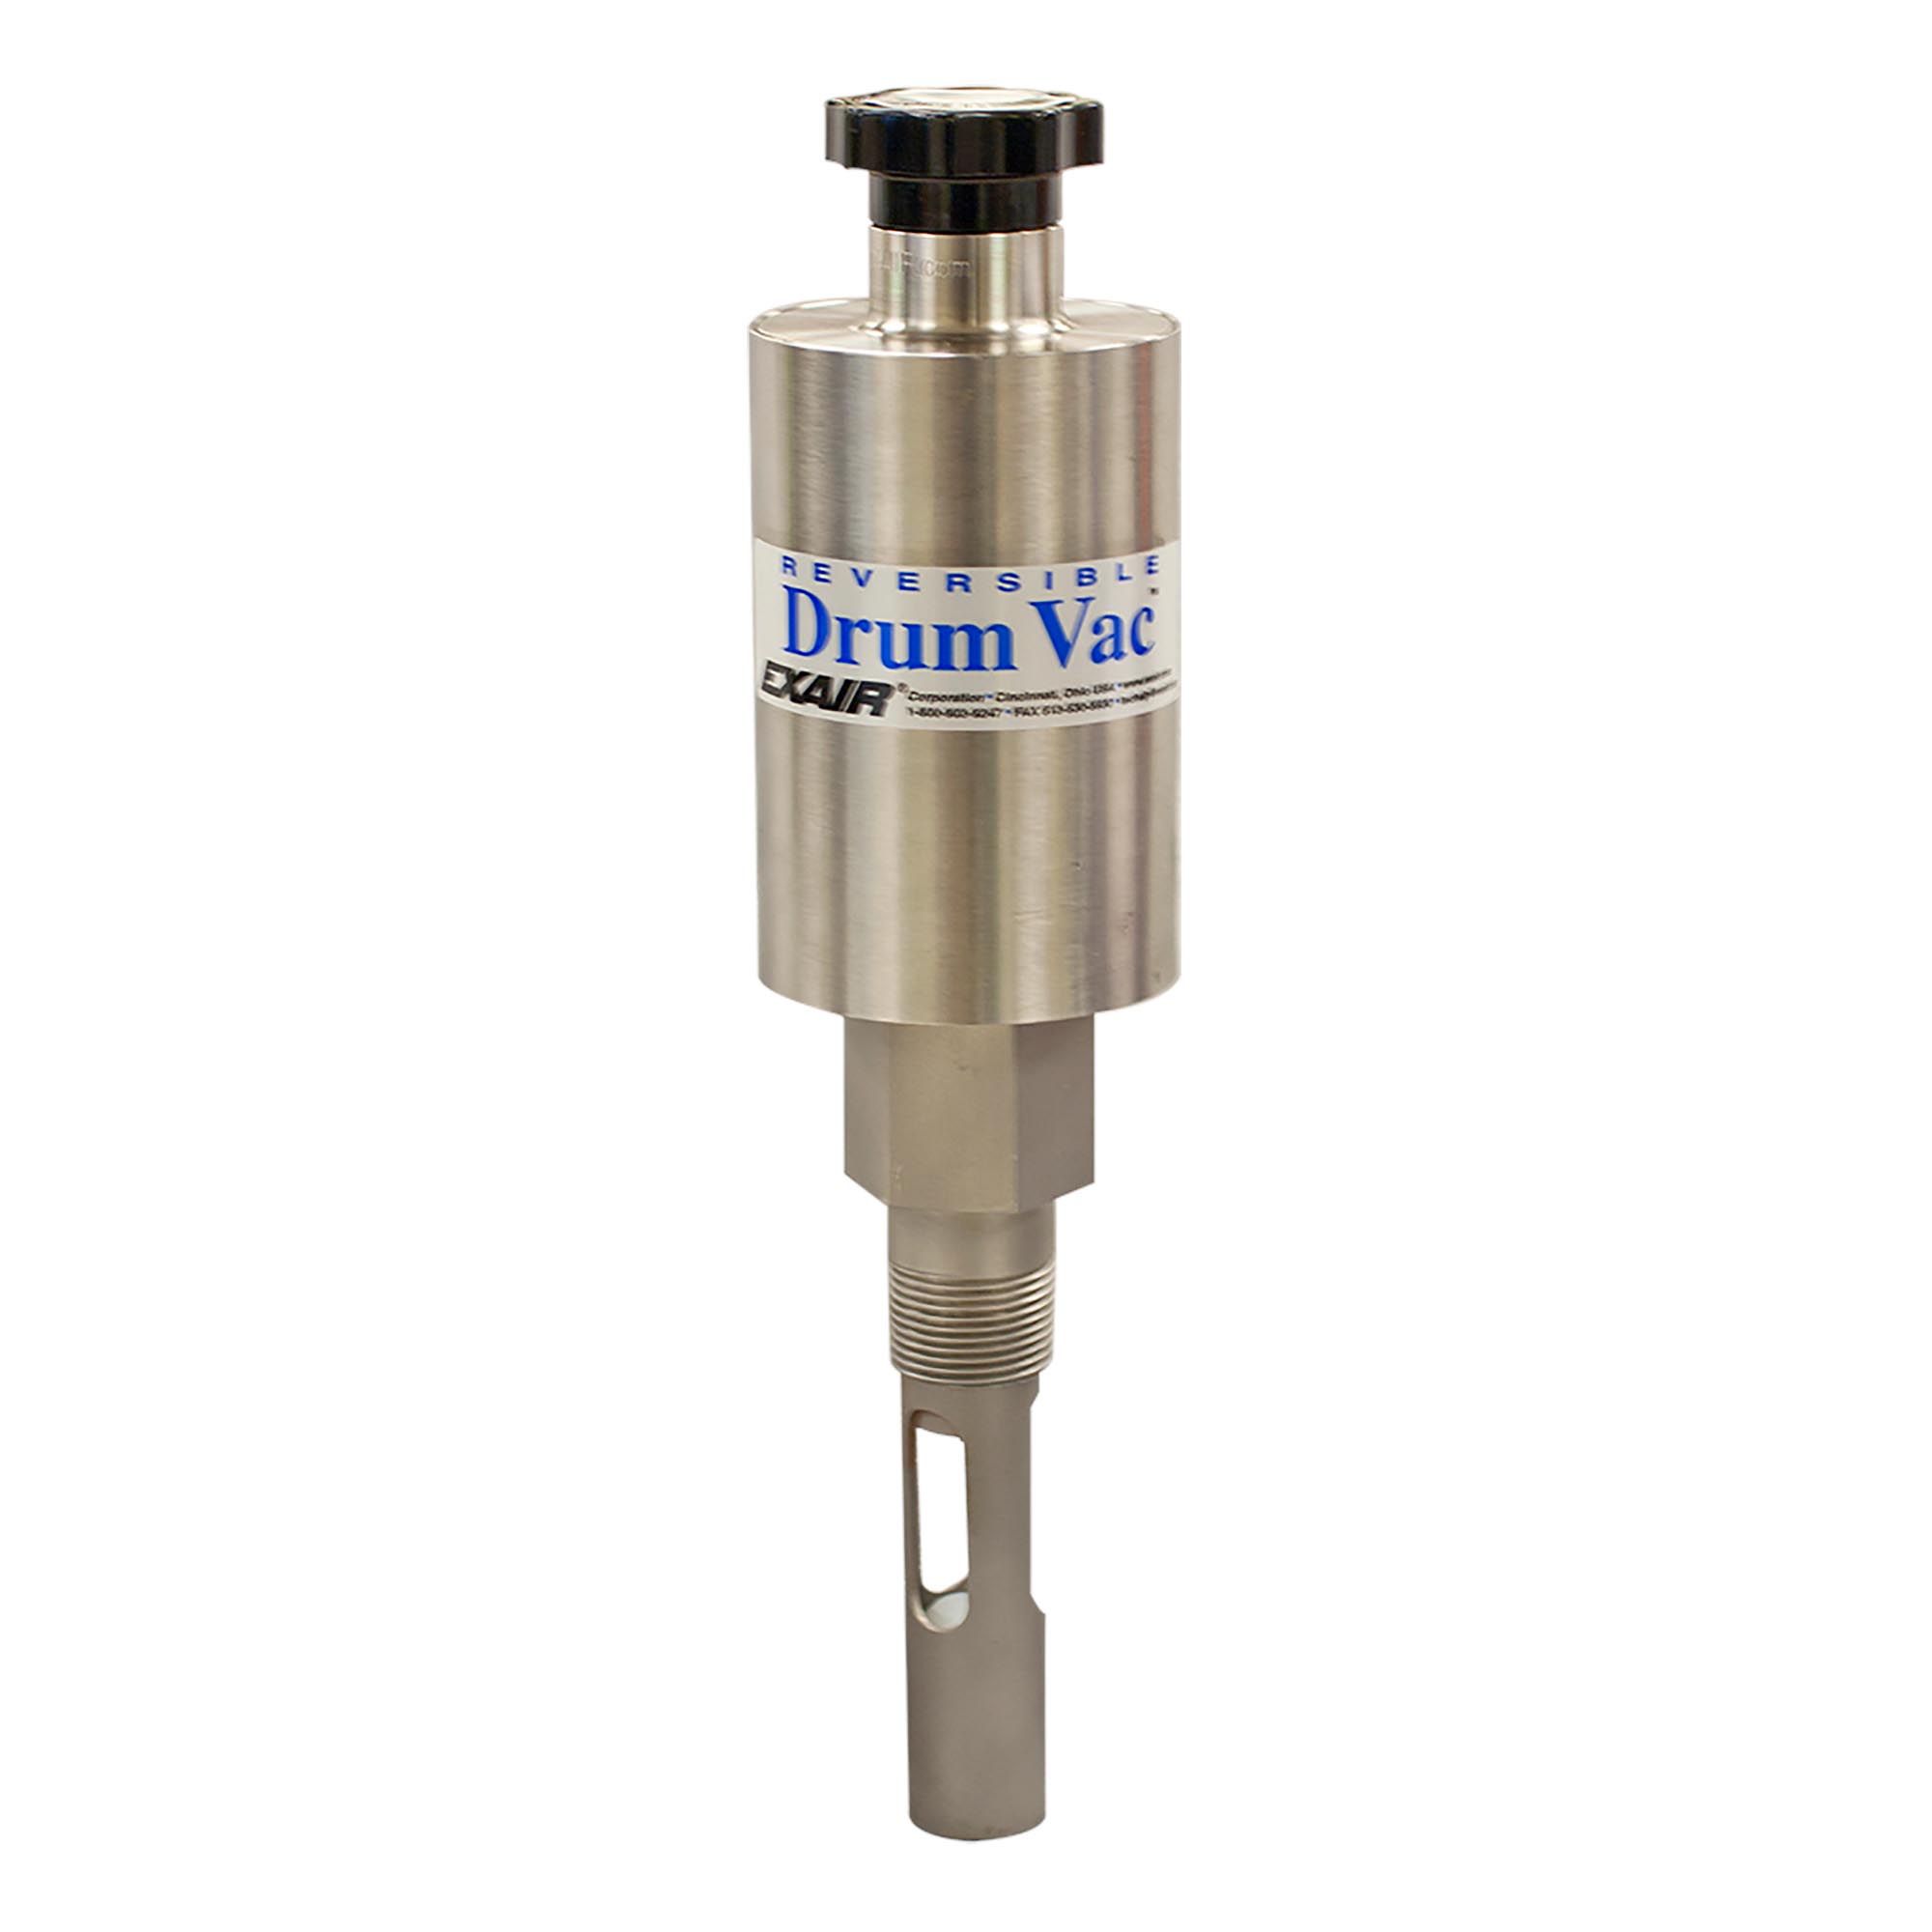 Reversible Drum Vac only